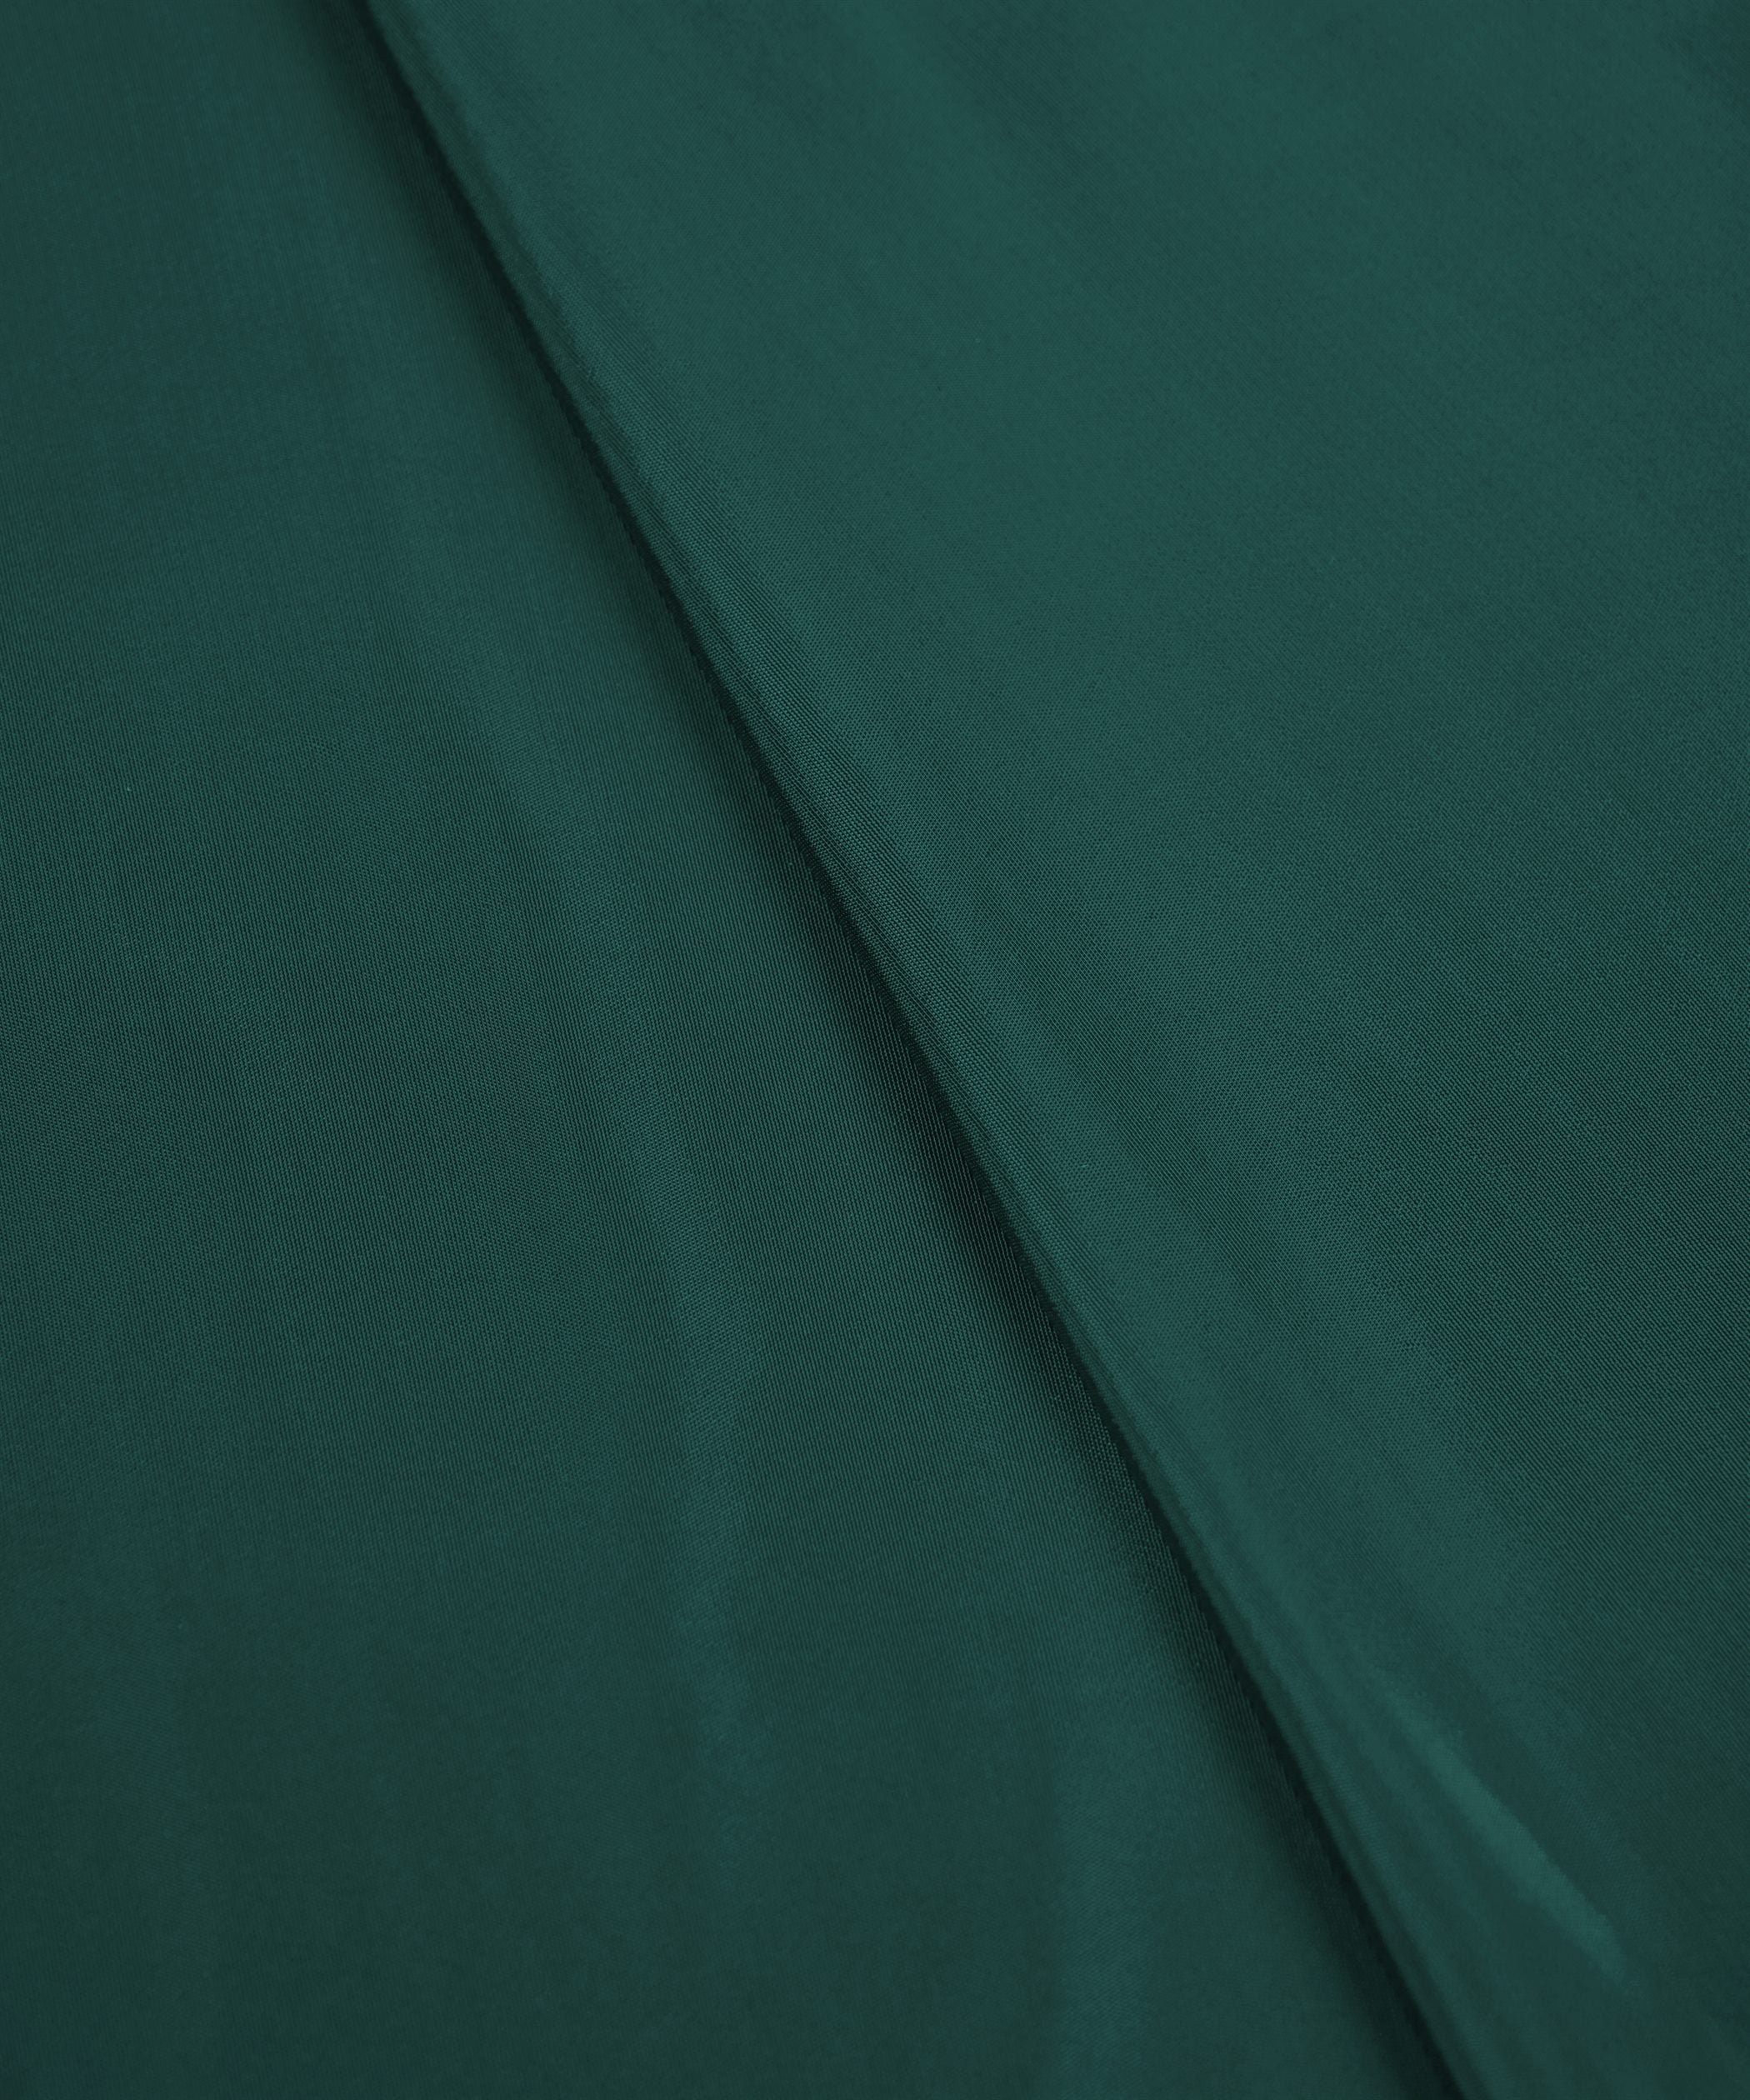 Teal Plain Dyed American Crepe Fabric